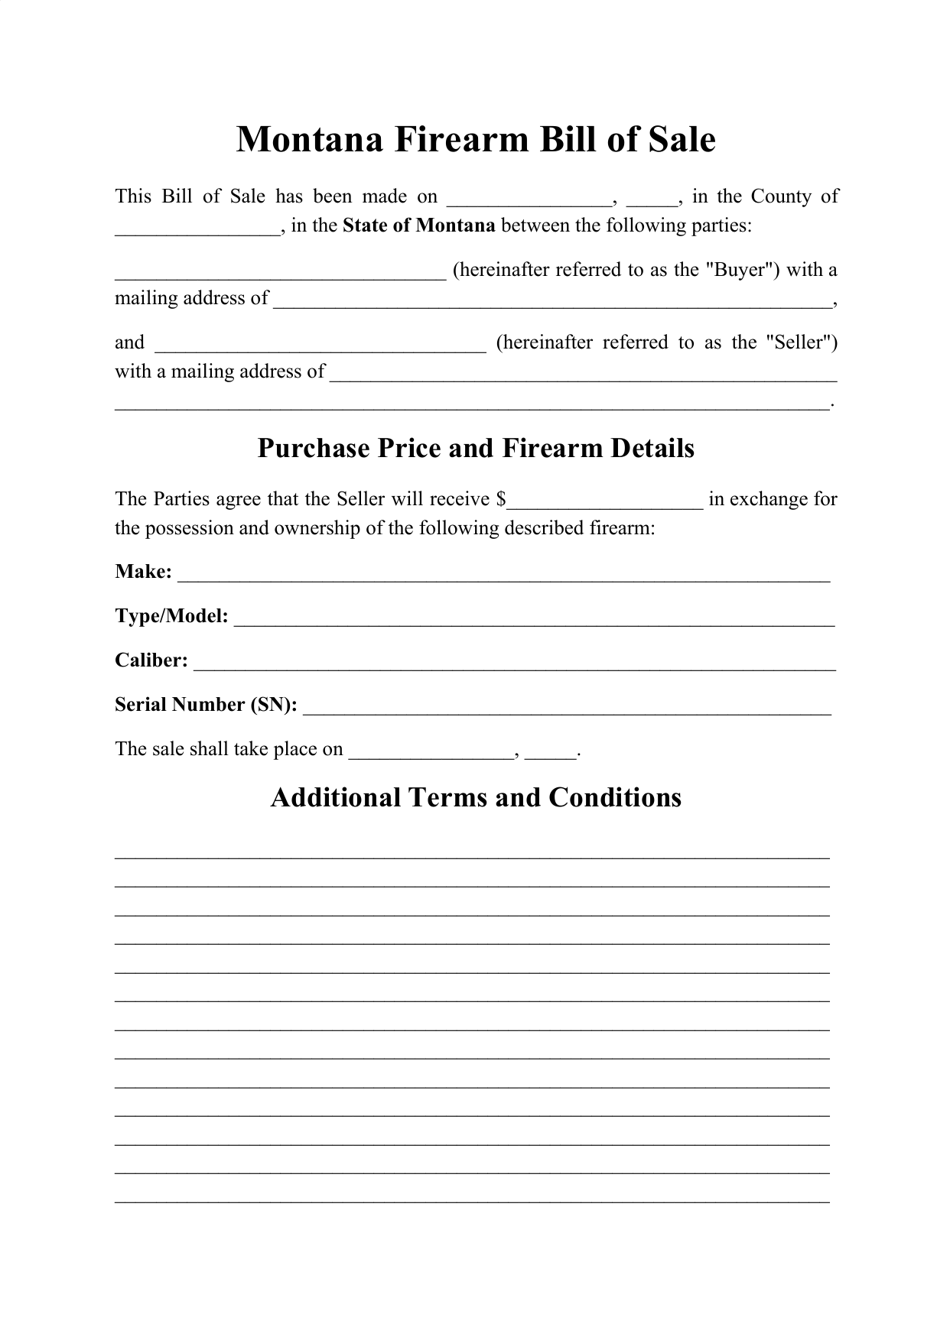 Montana Firearm Bill of Sale Form Fill Out, Sign Online and Download